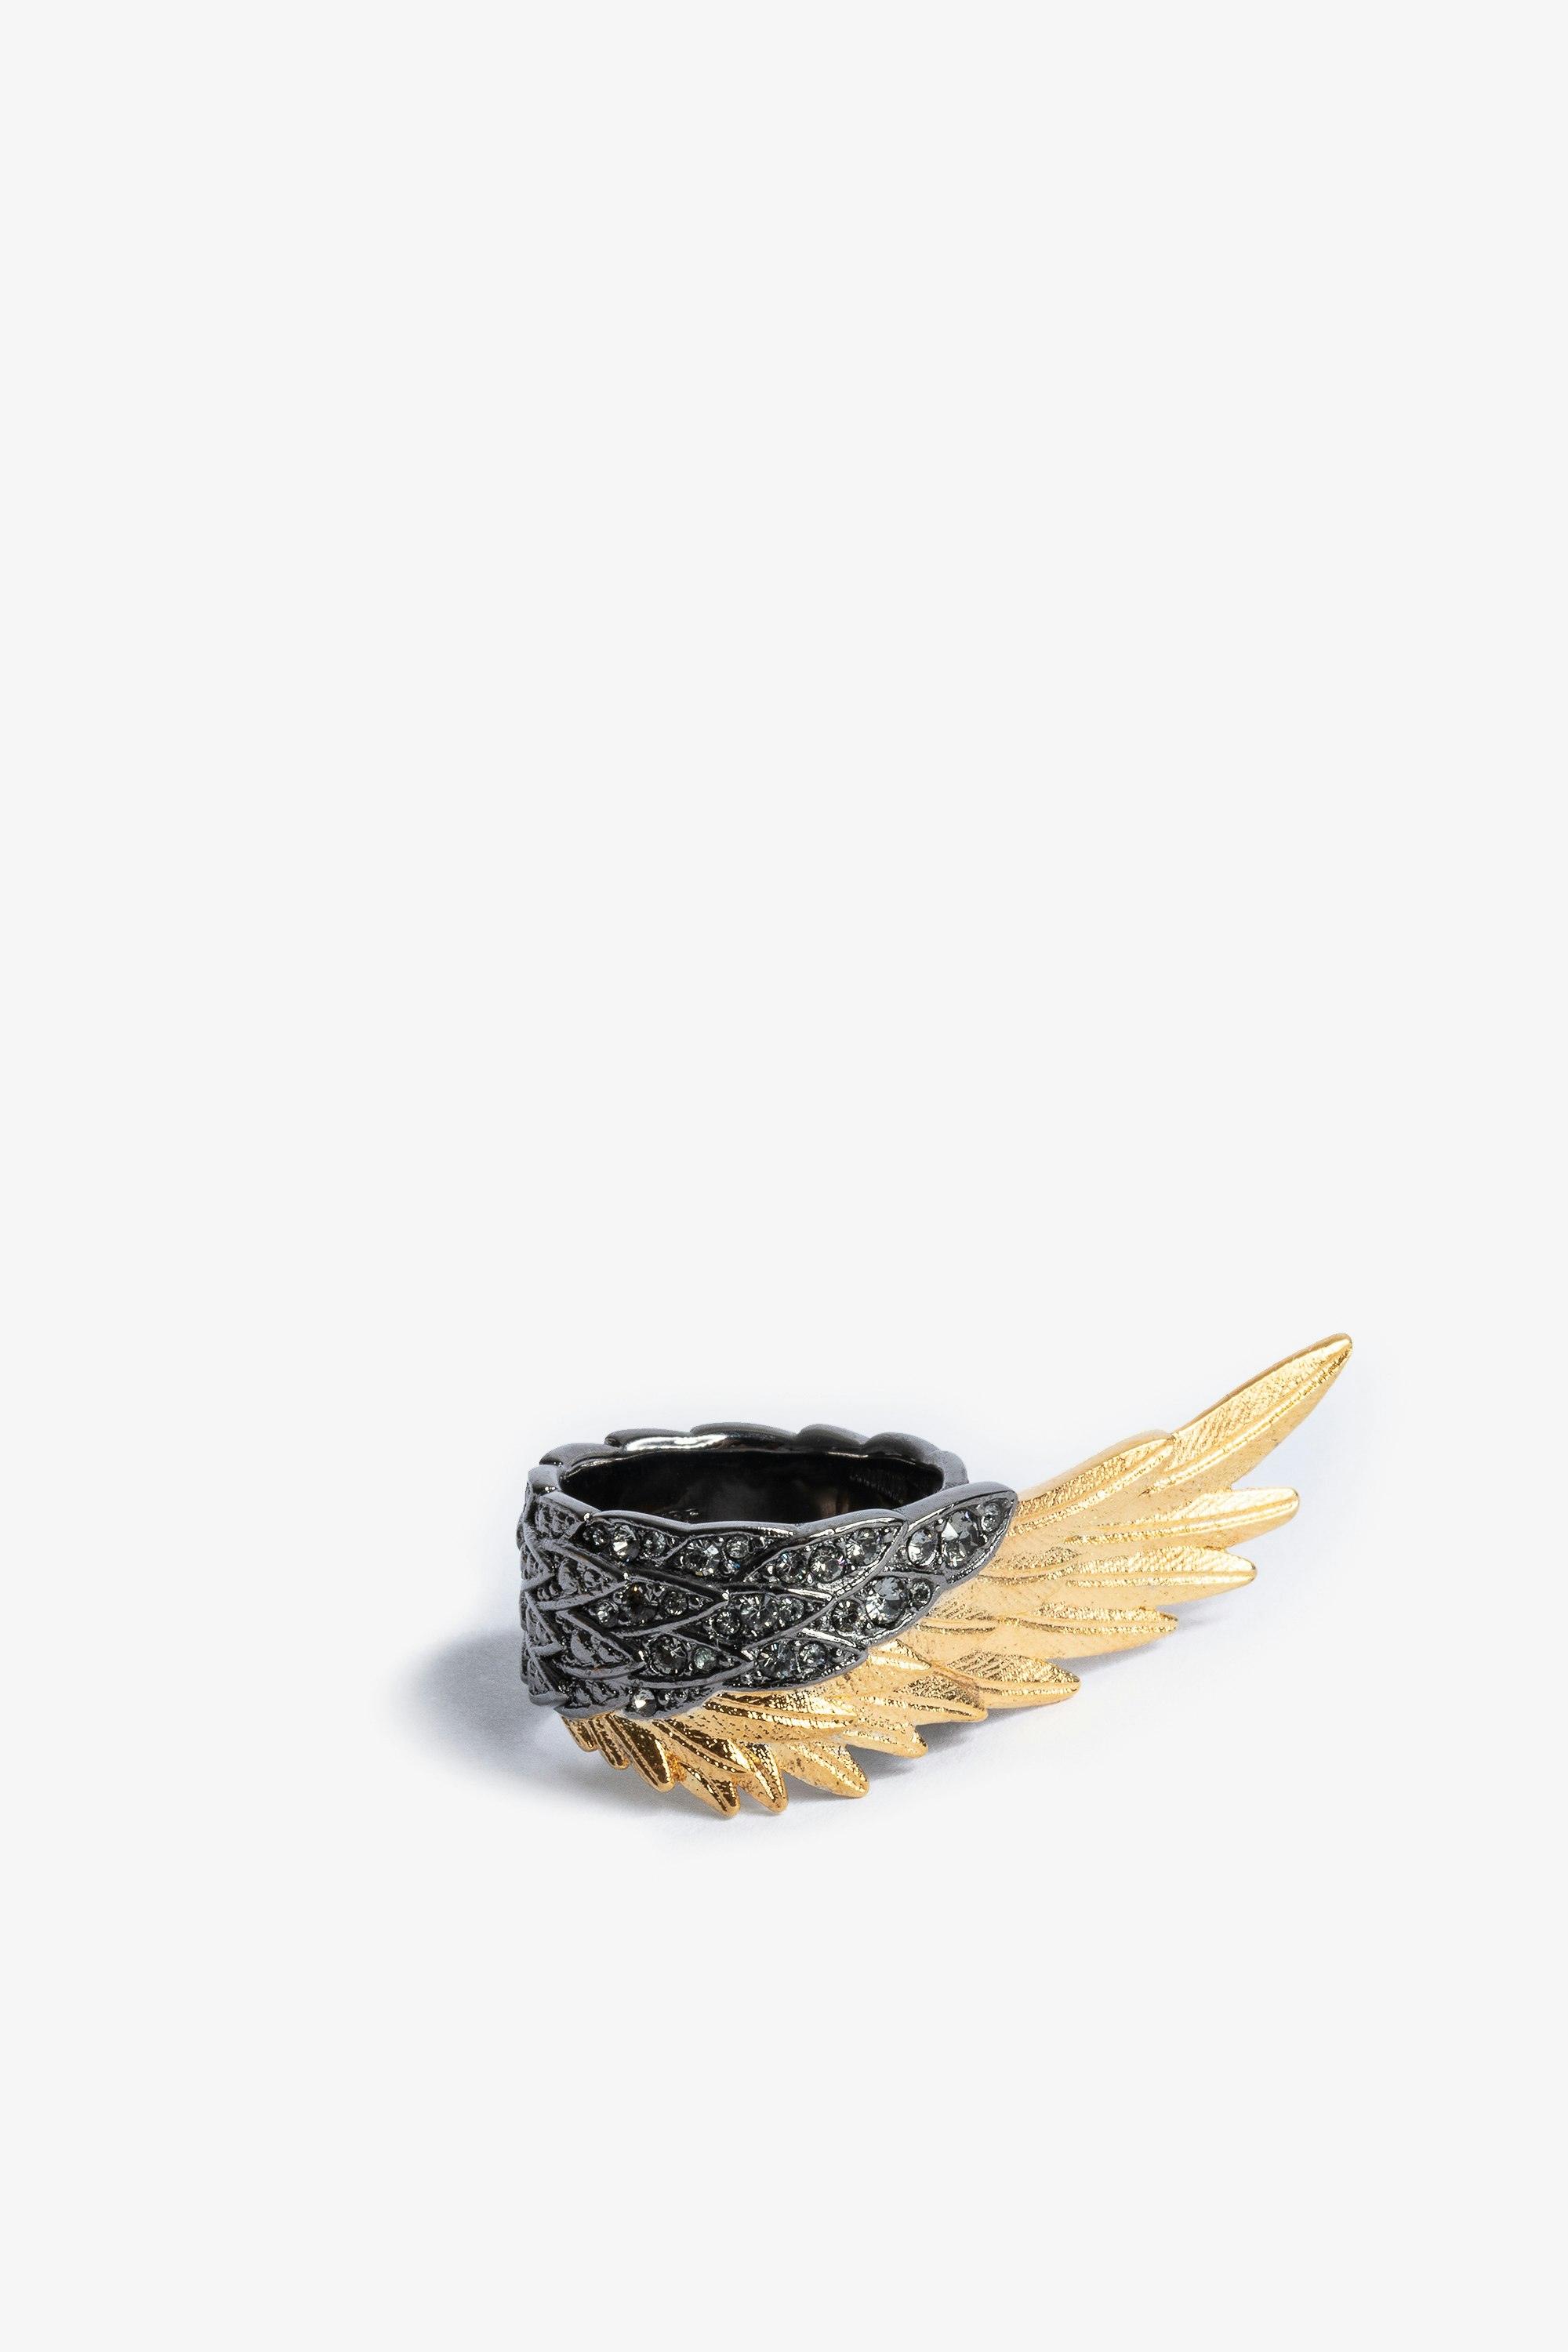 Rock Feather Spread your wings 指輪 Women’s crystal-embellished blackened and gold-tone brass ring